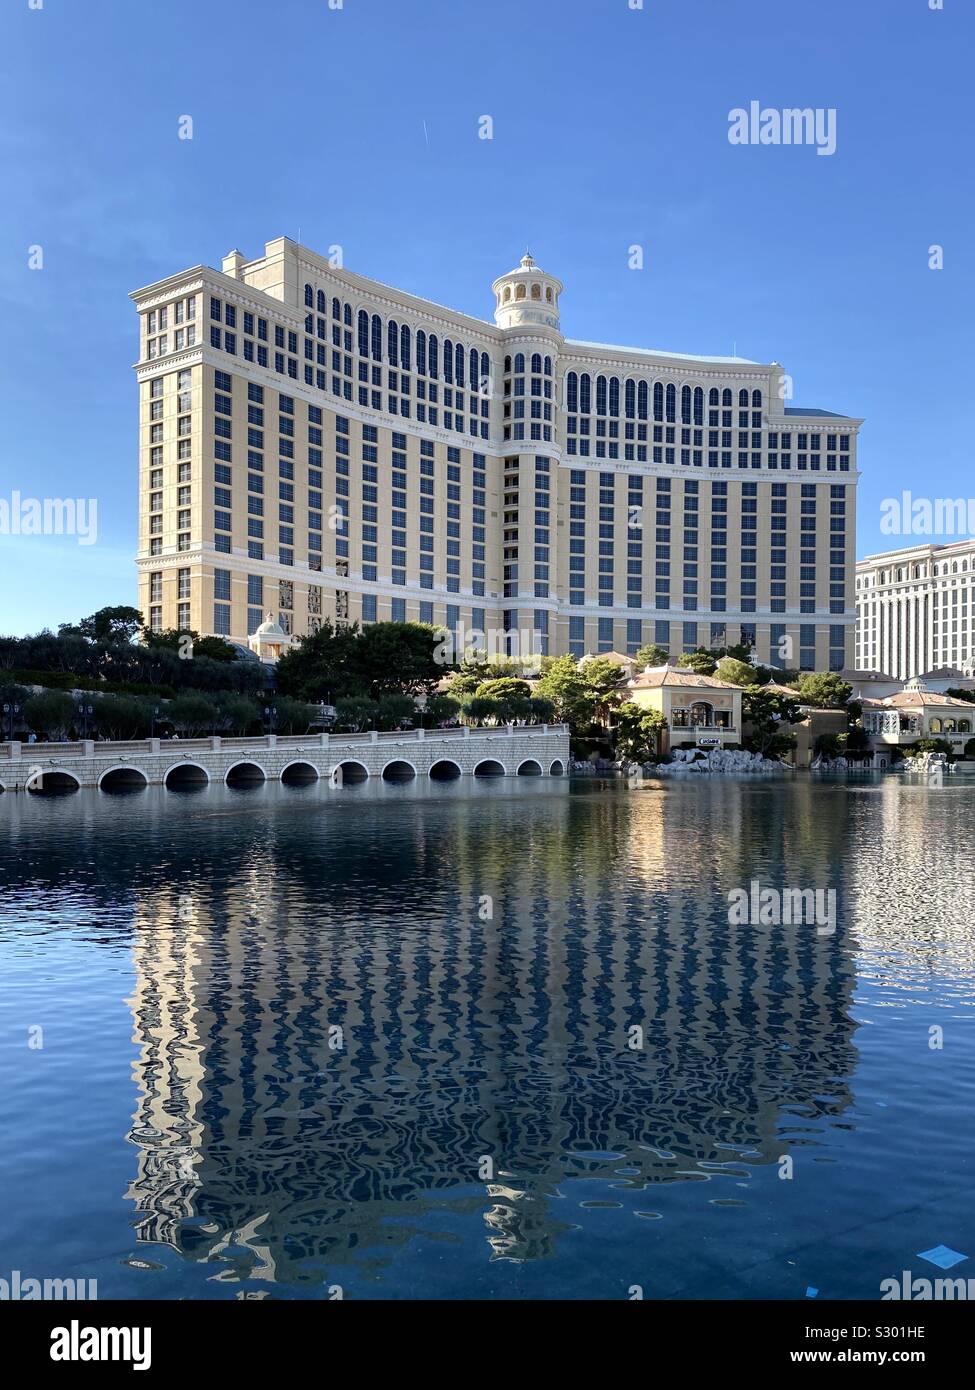 View of Bellagio in Las Vegas with reflections of the building on the water Stock Photo